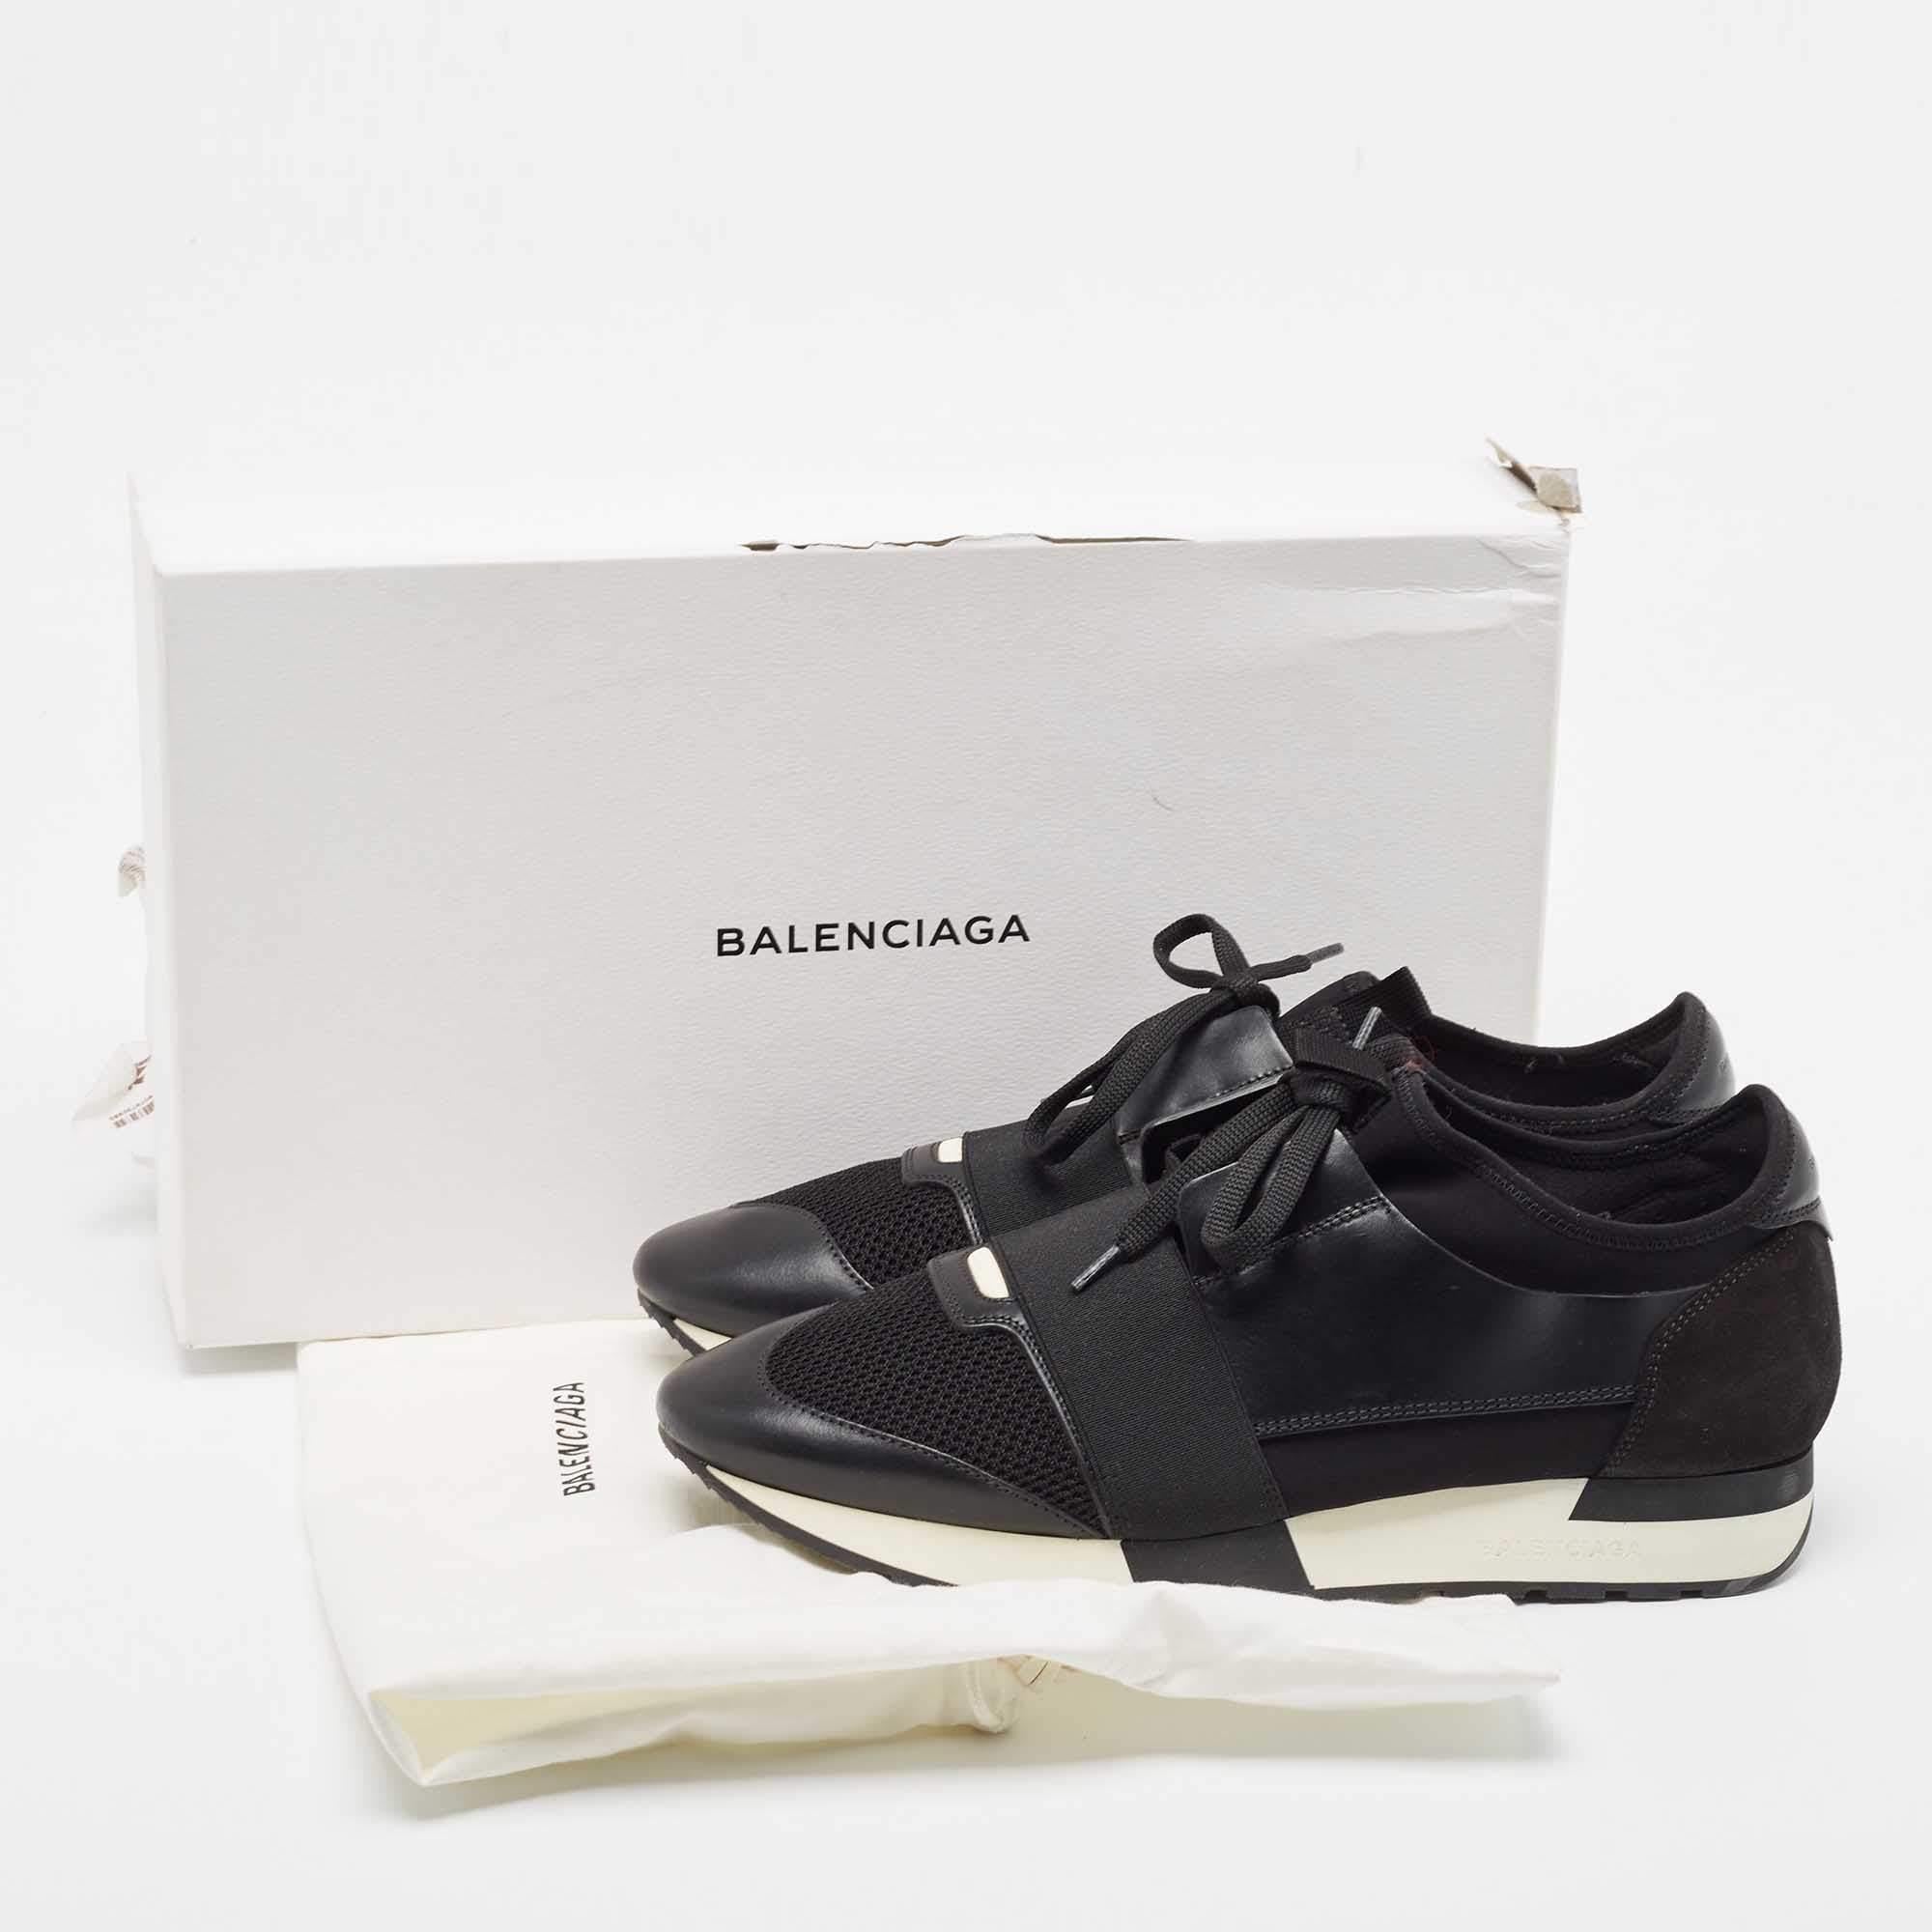 Balenciaga Black Leather, Mesh Race Runner Sneakers Size 42 For Sale 4